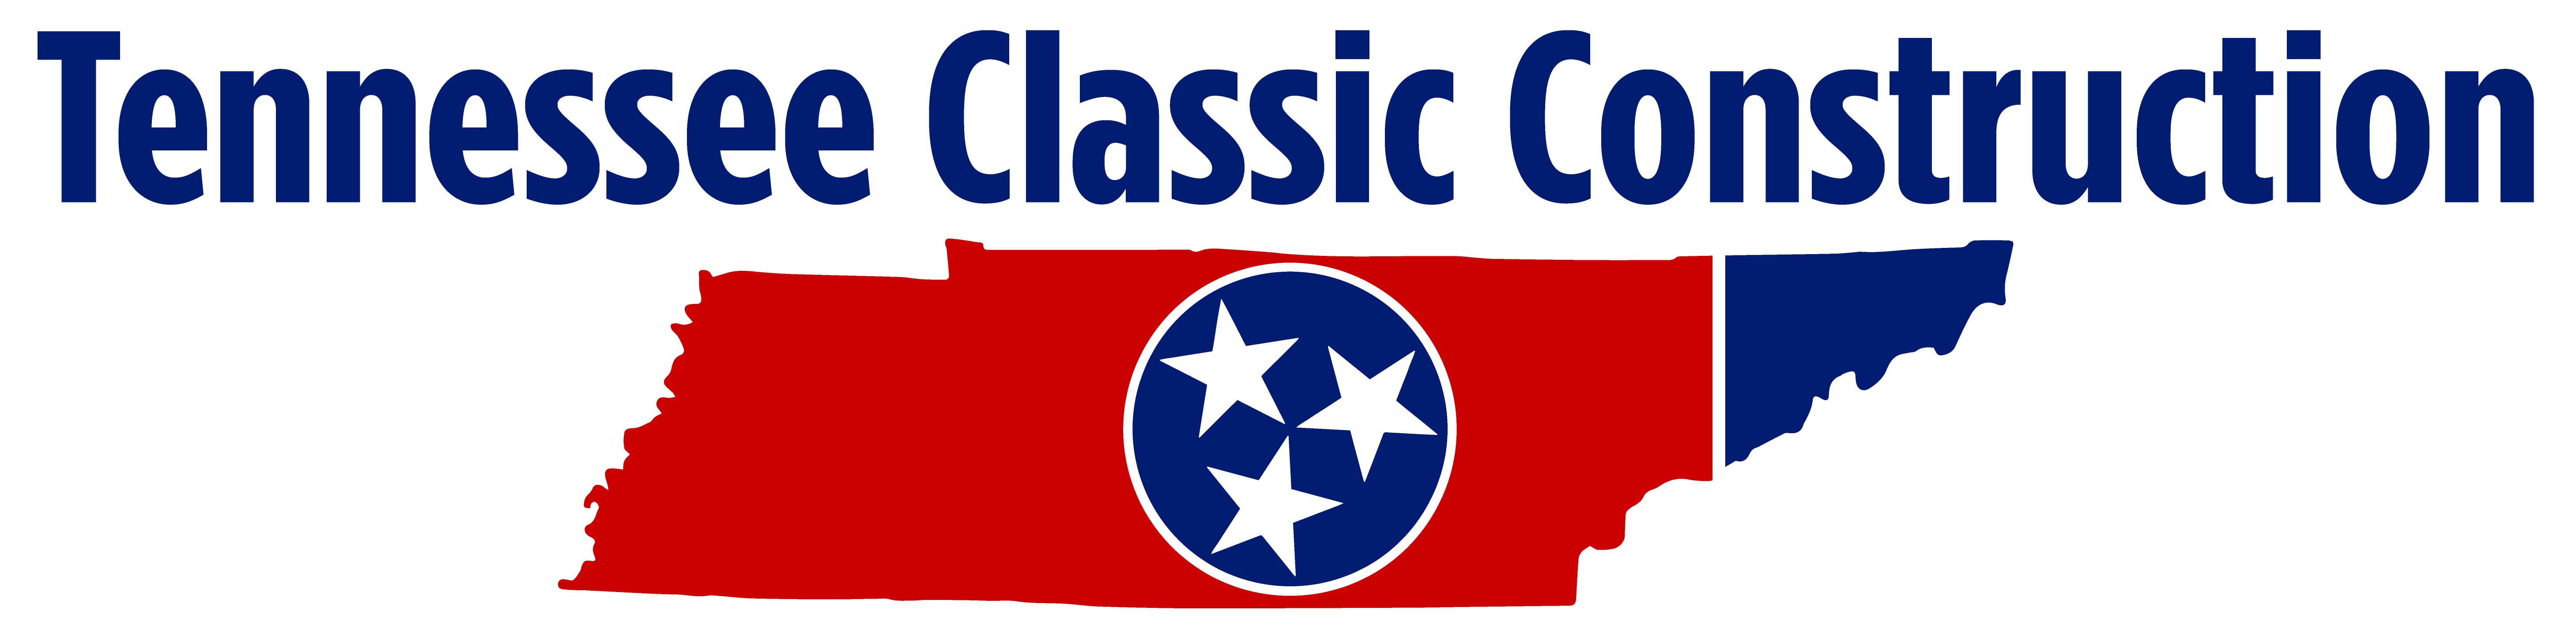 Tennessee Classic Construction Logo